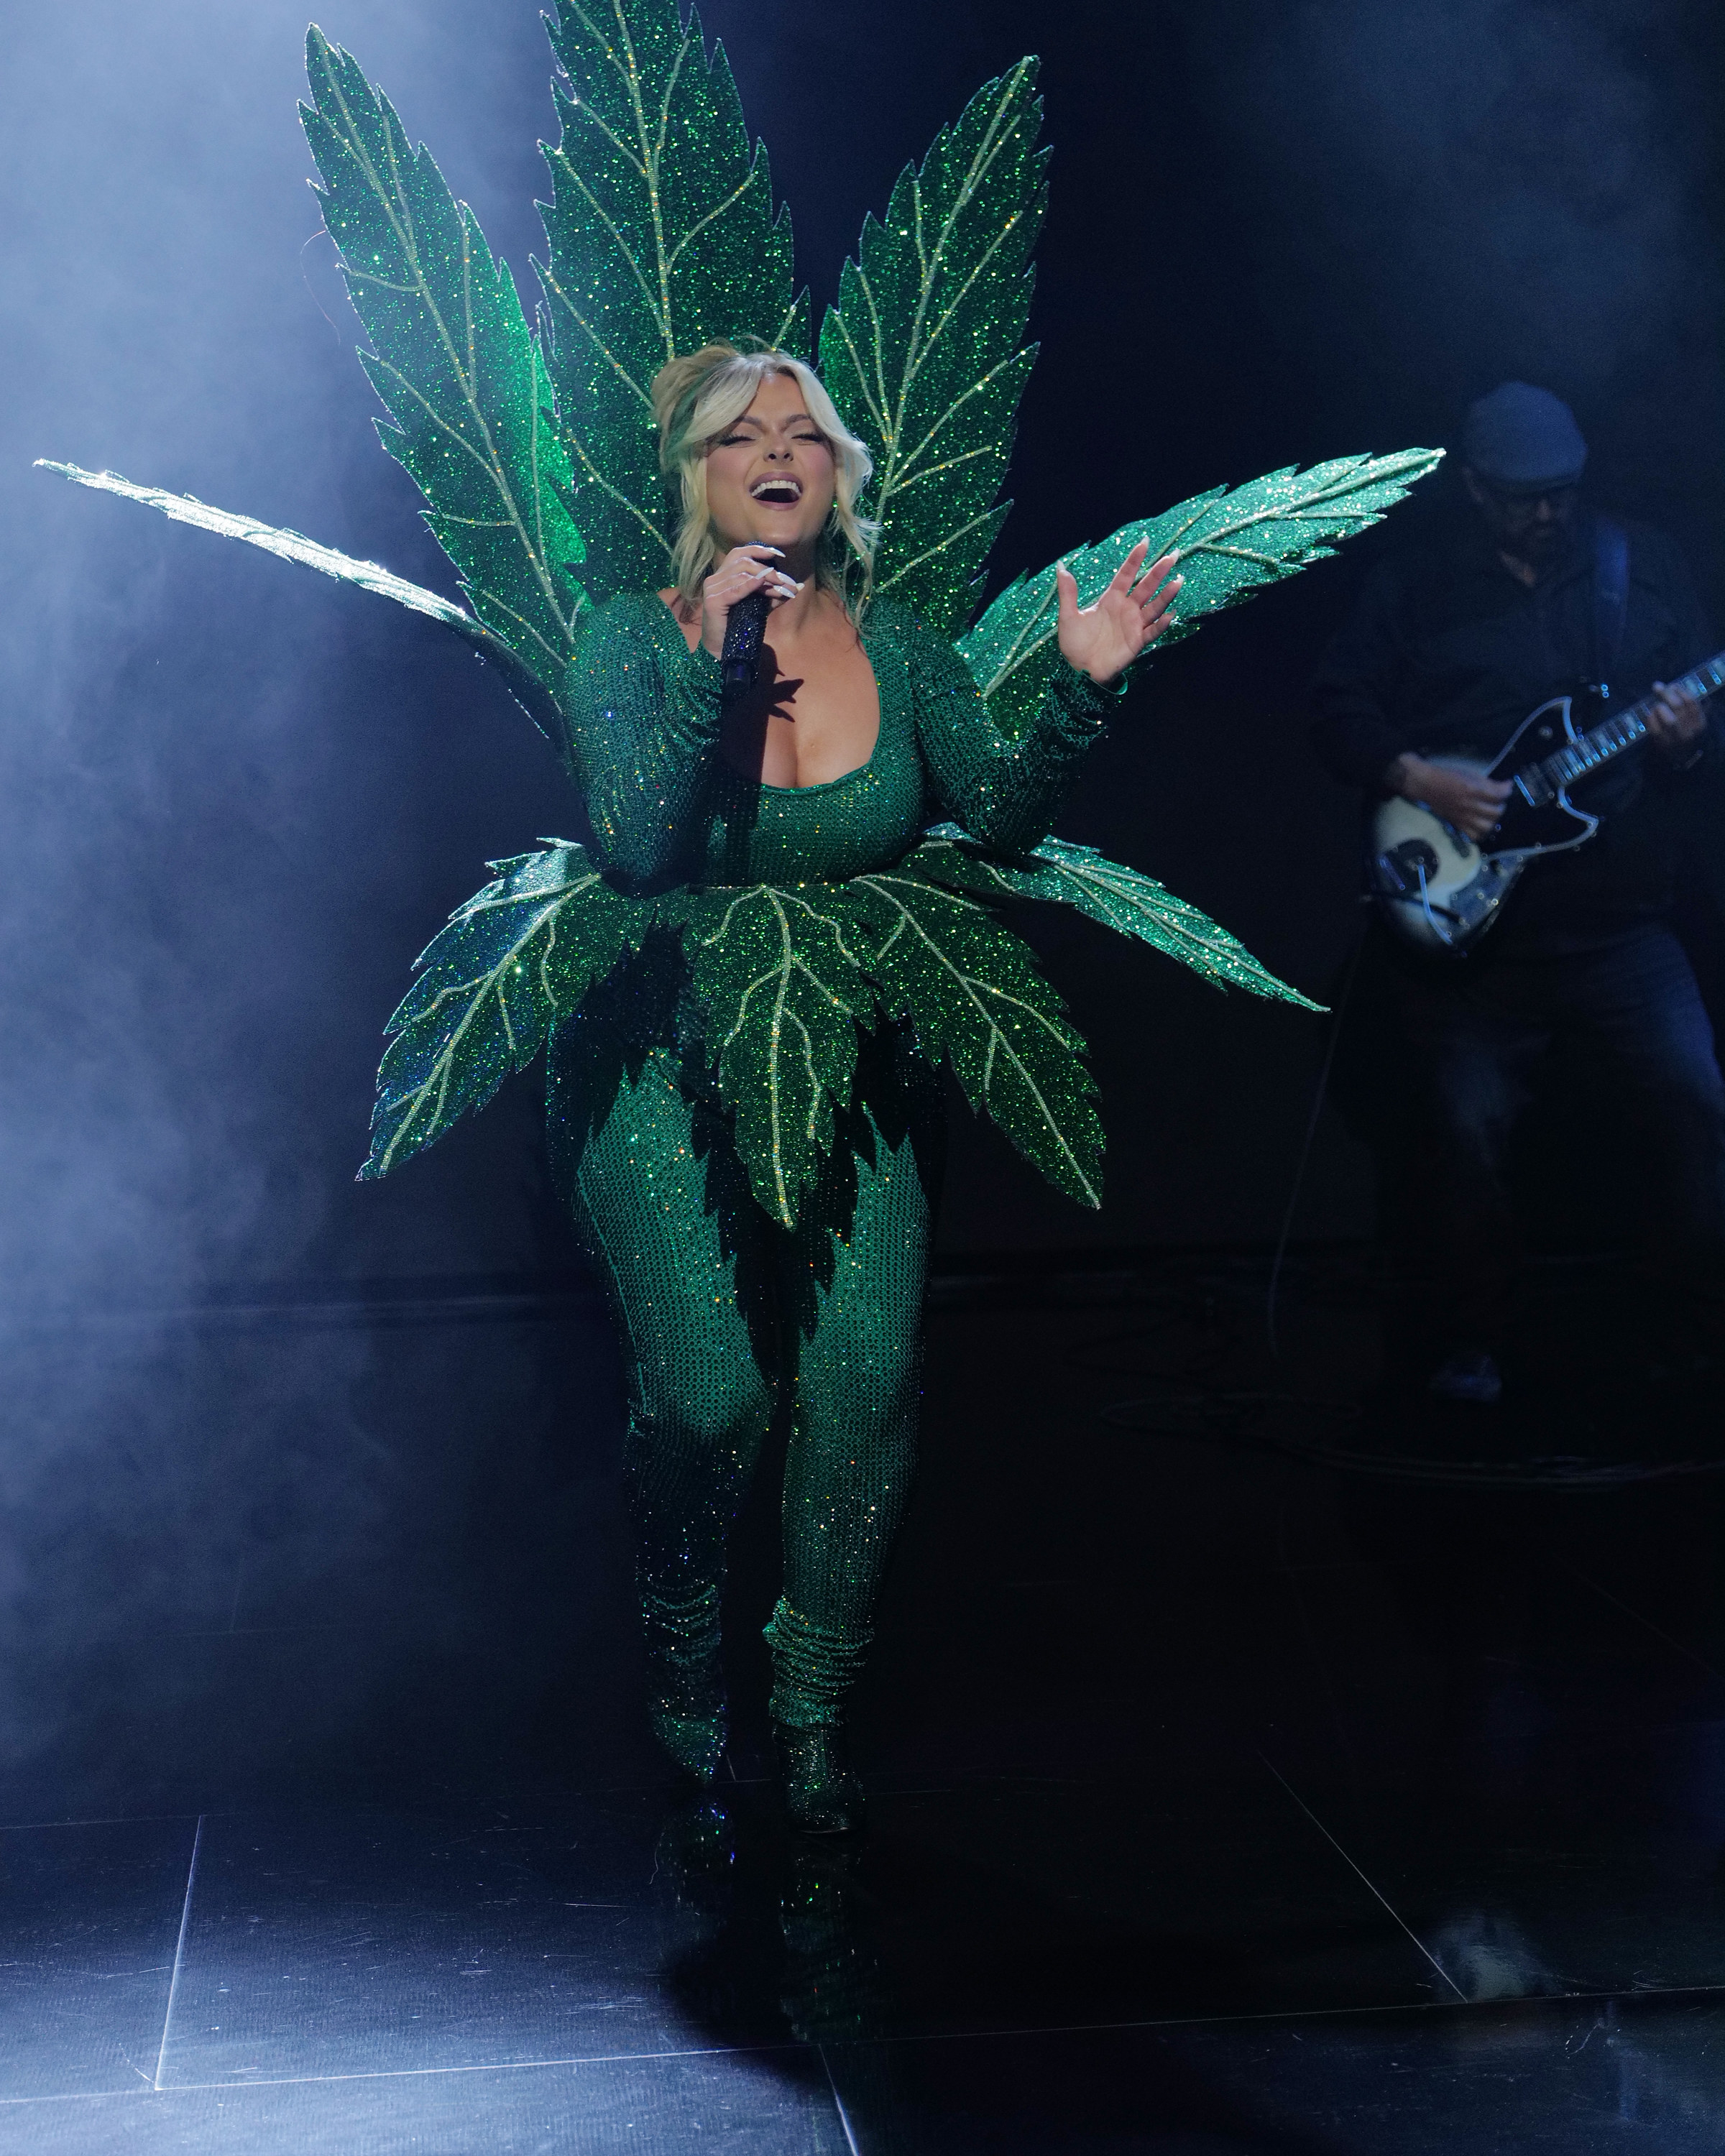 Bebe Rexha onstage in a leotard made to look like a leaf